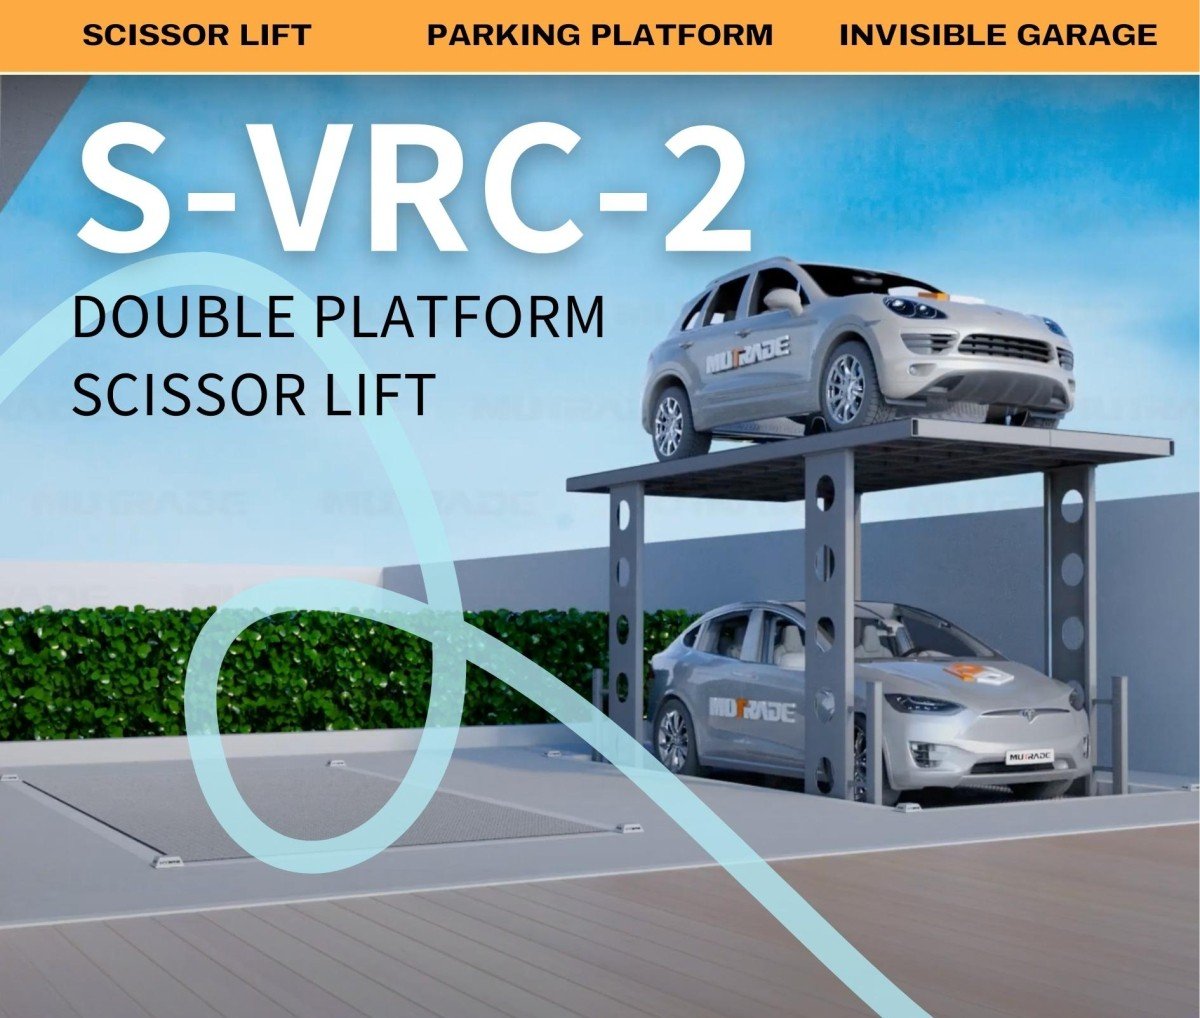 Introducing the S-VRC-2 Two-Platform Scissor Lift – Transform Your Underground Parking Experience